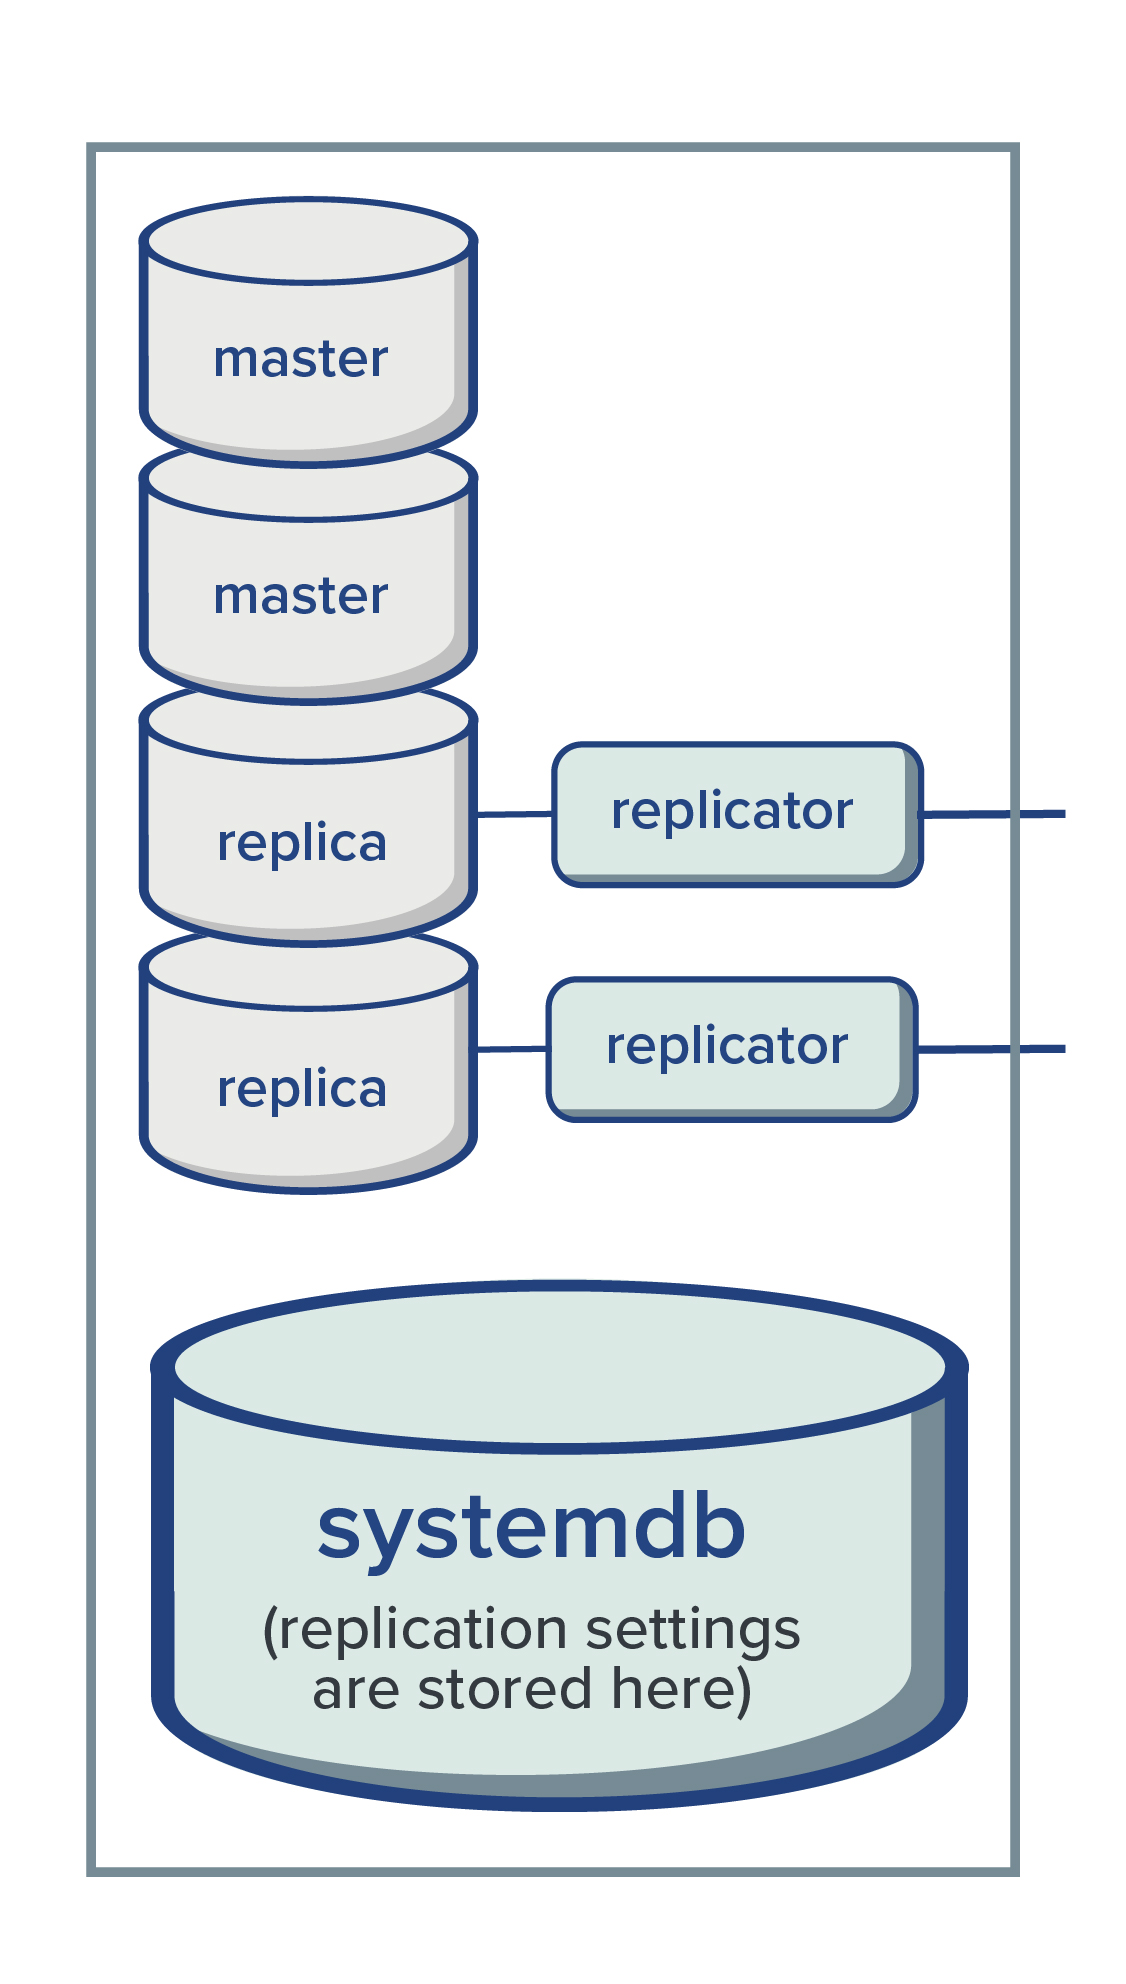 a single immudb server can hold multiple master and replica databases